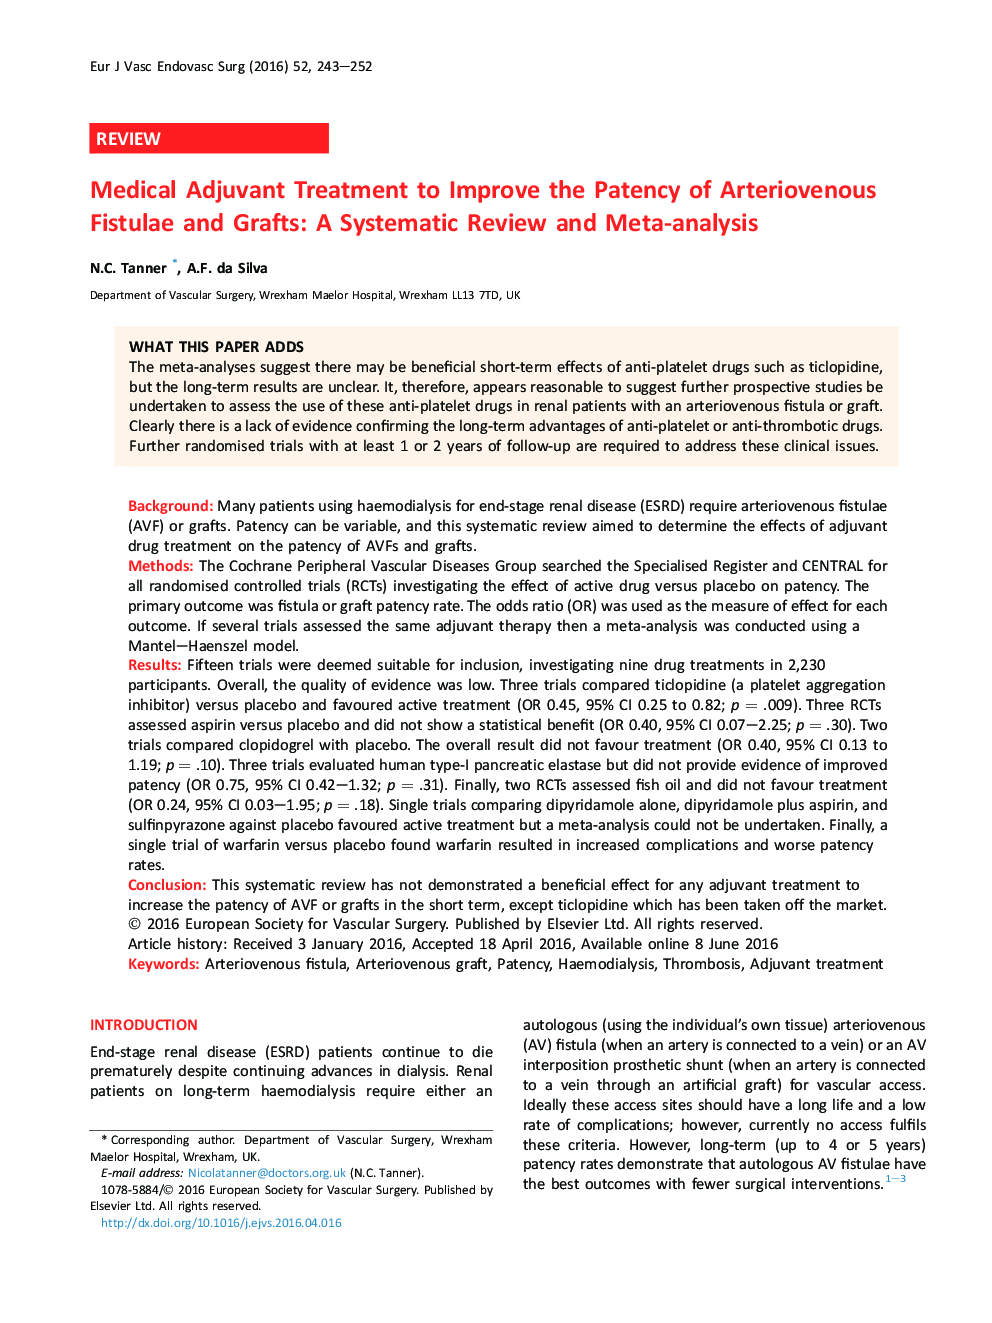 Medical Adjuvant Treatment to Improve the Patency of Arteriovenous Fistulae and Grafts: A Systematic Review and Meta-analysis